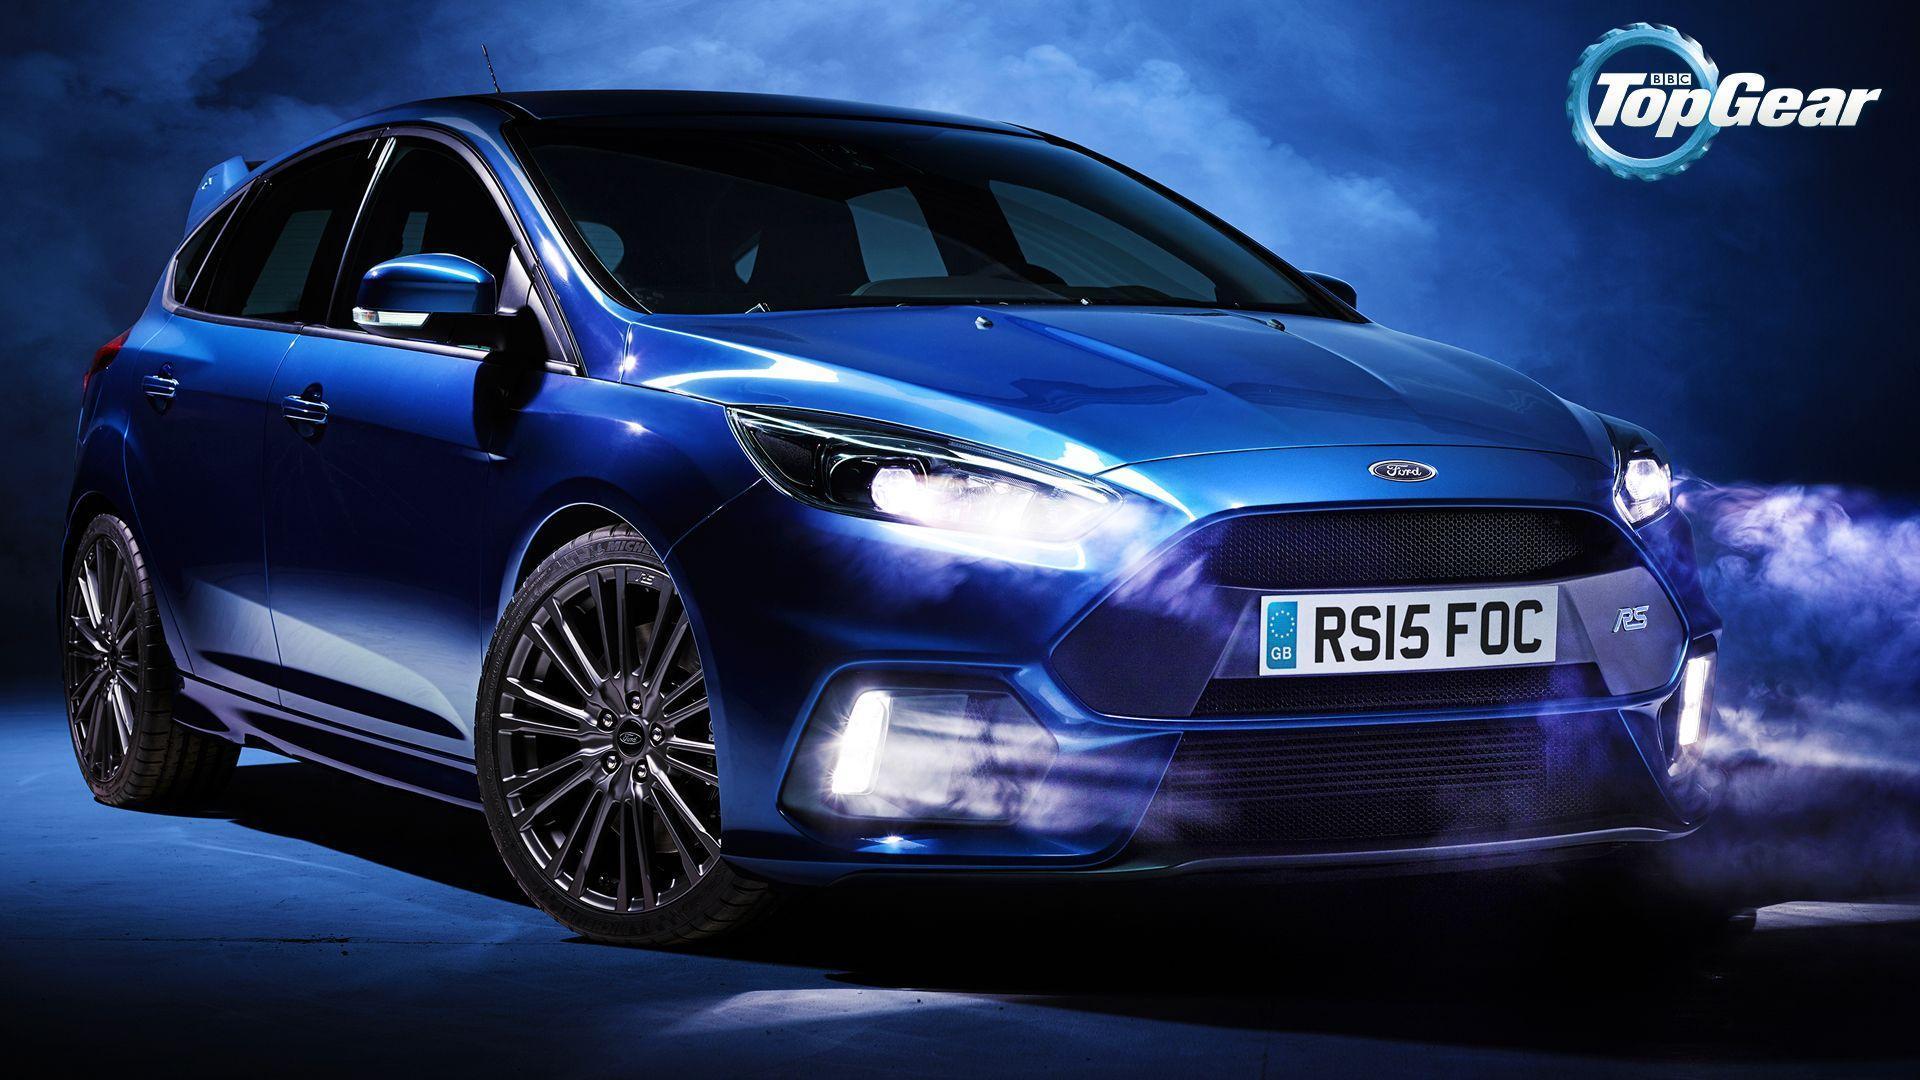 Wallpaper: the new Focus RS